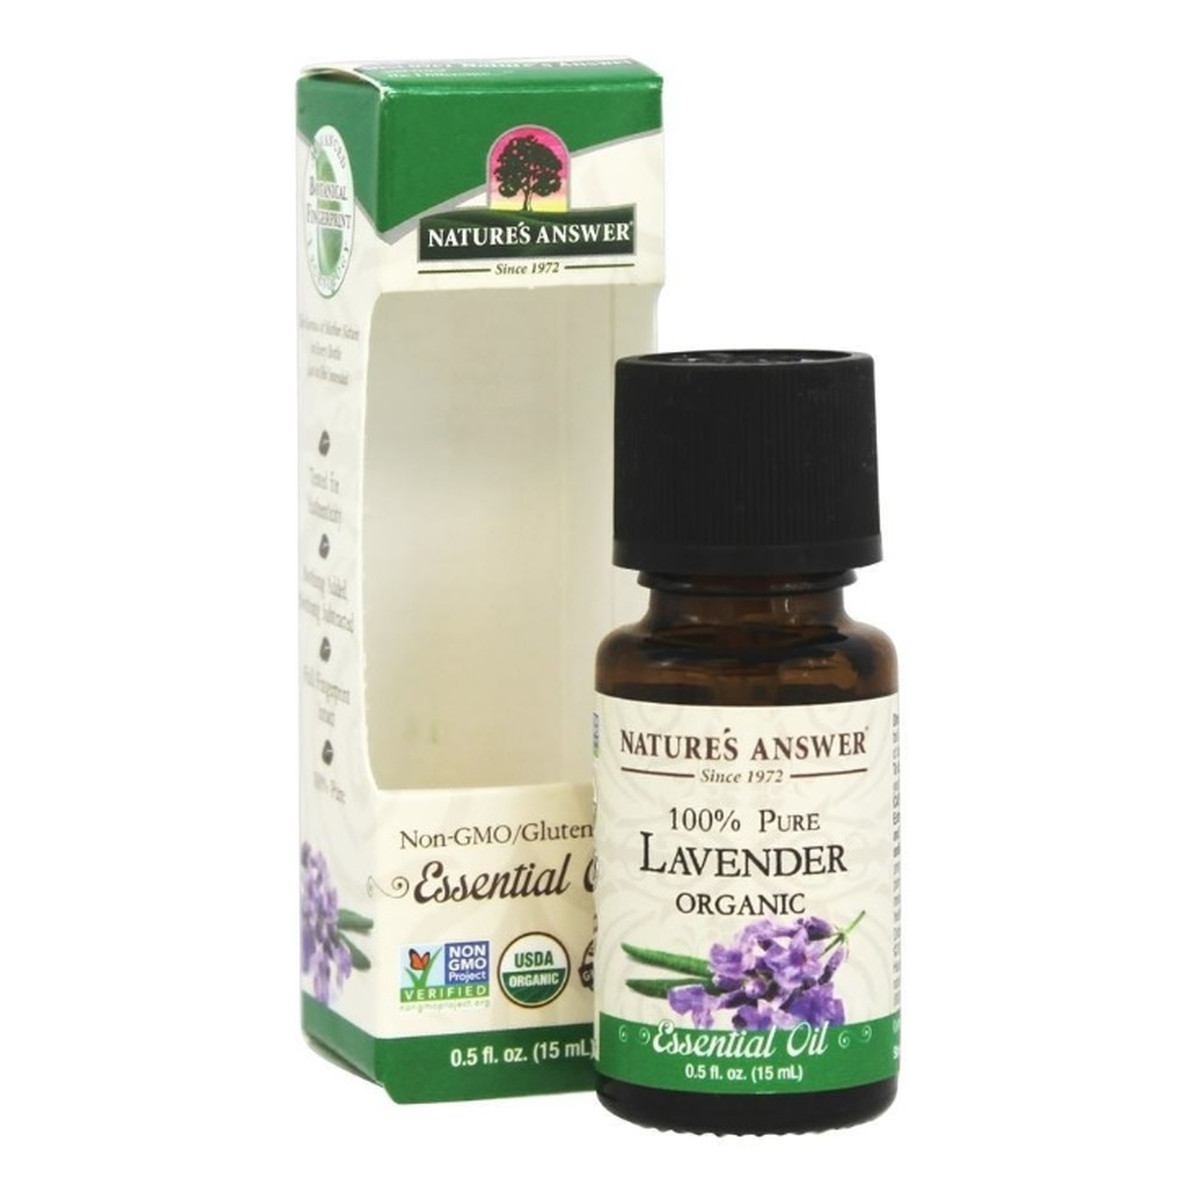 Nature's Answer 100% Pure Lavender Organic Essential Oil organiczny olejek lawendowy 15ml